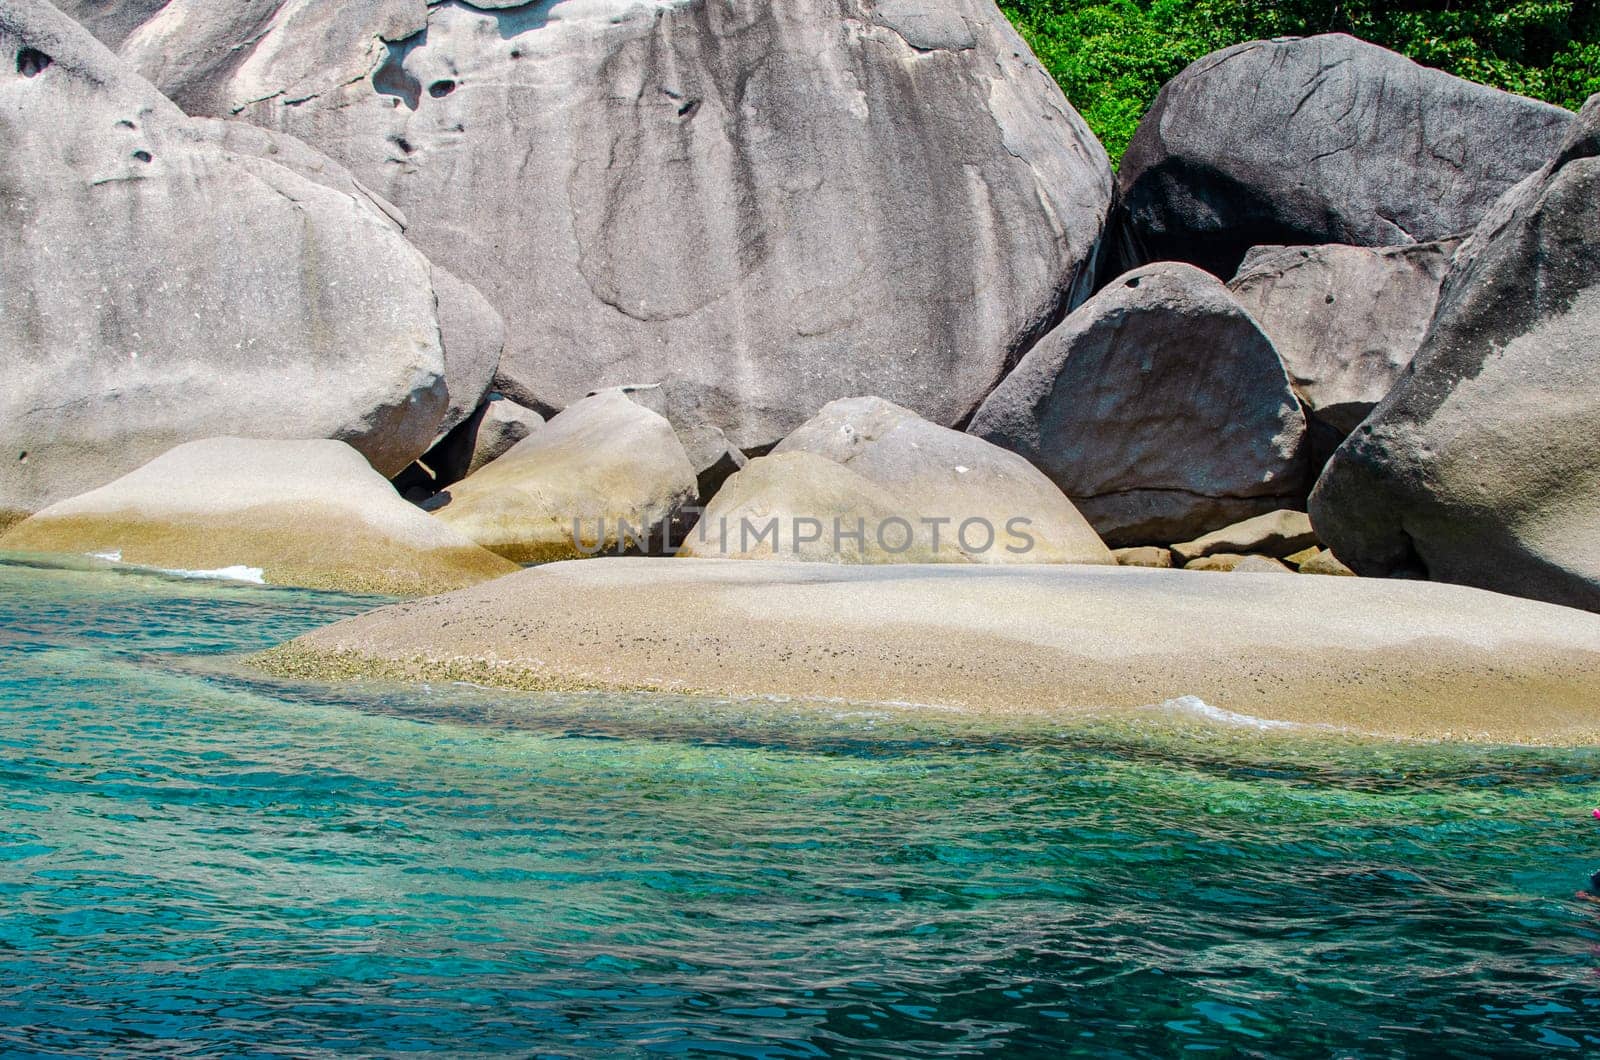 Rocks and stone beach Similan Islands with famous Sail Rock, Phang Nga Thailand nature landscape.